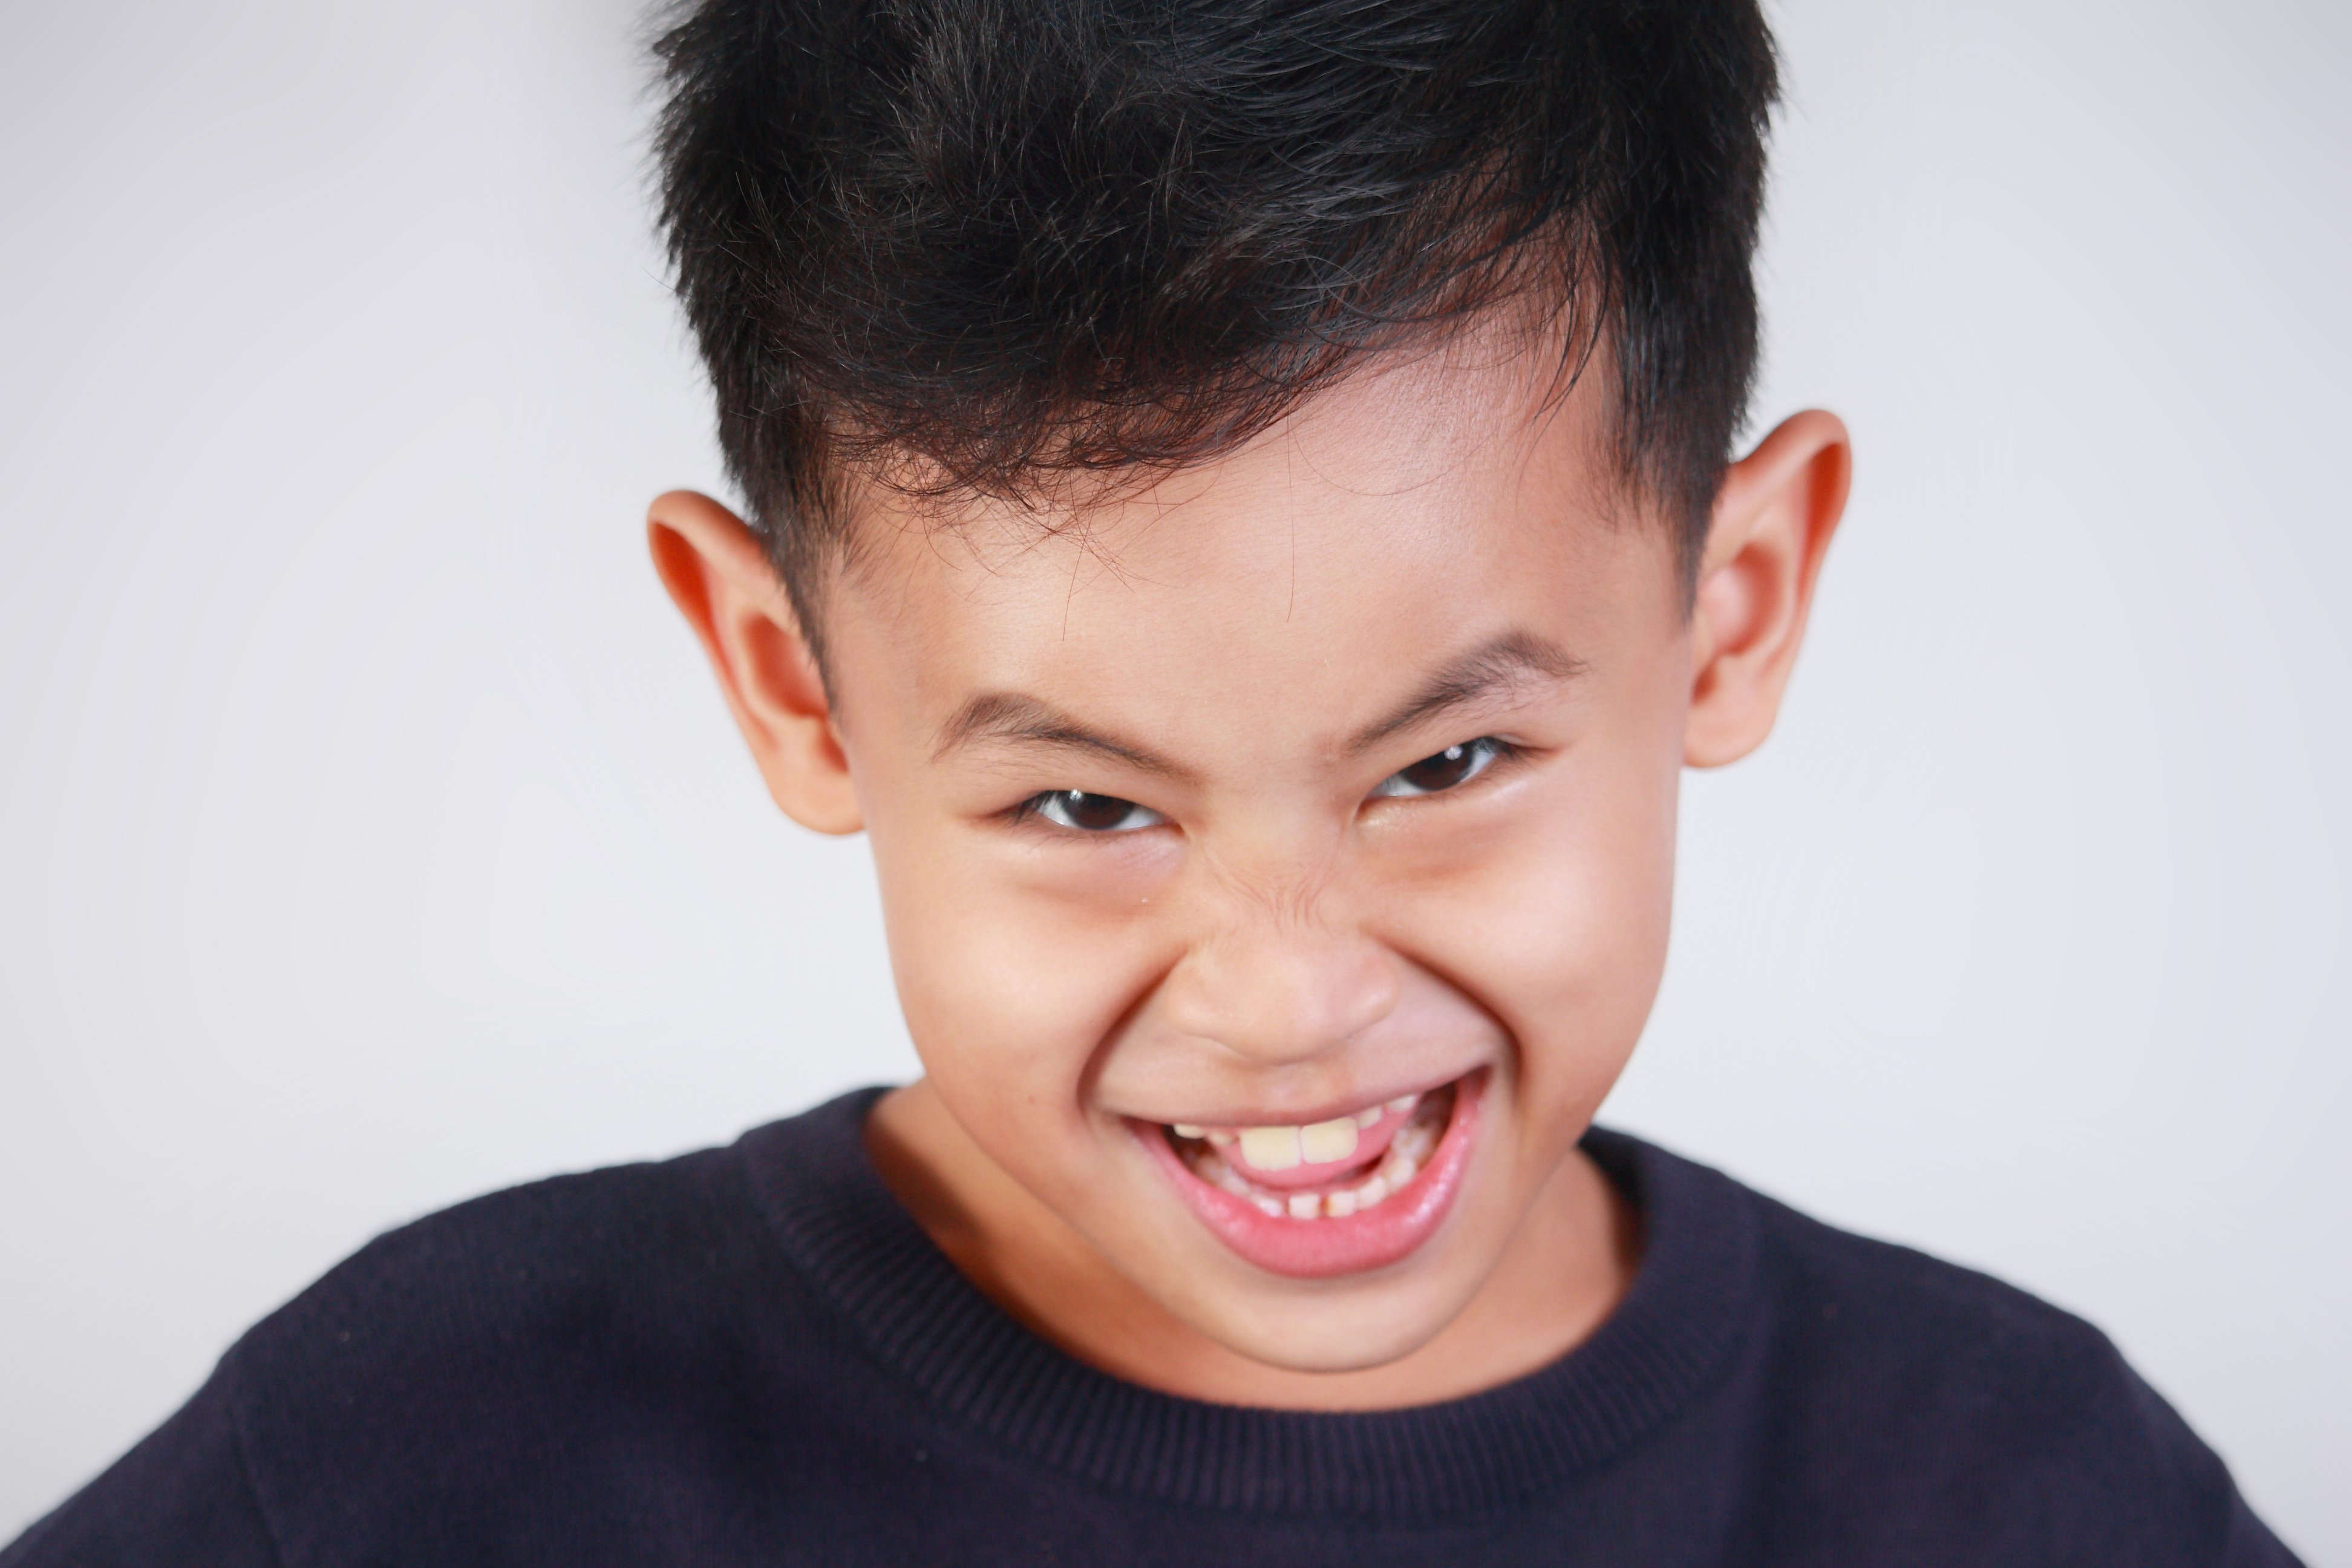 Dark haired boy with naughty facial expression. | Source: Shutterstock